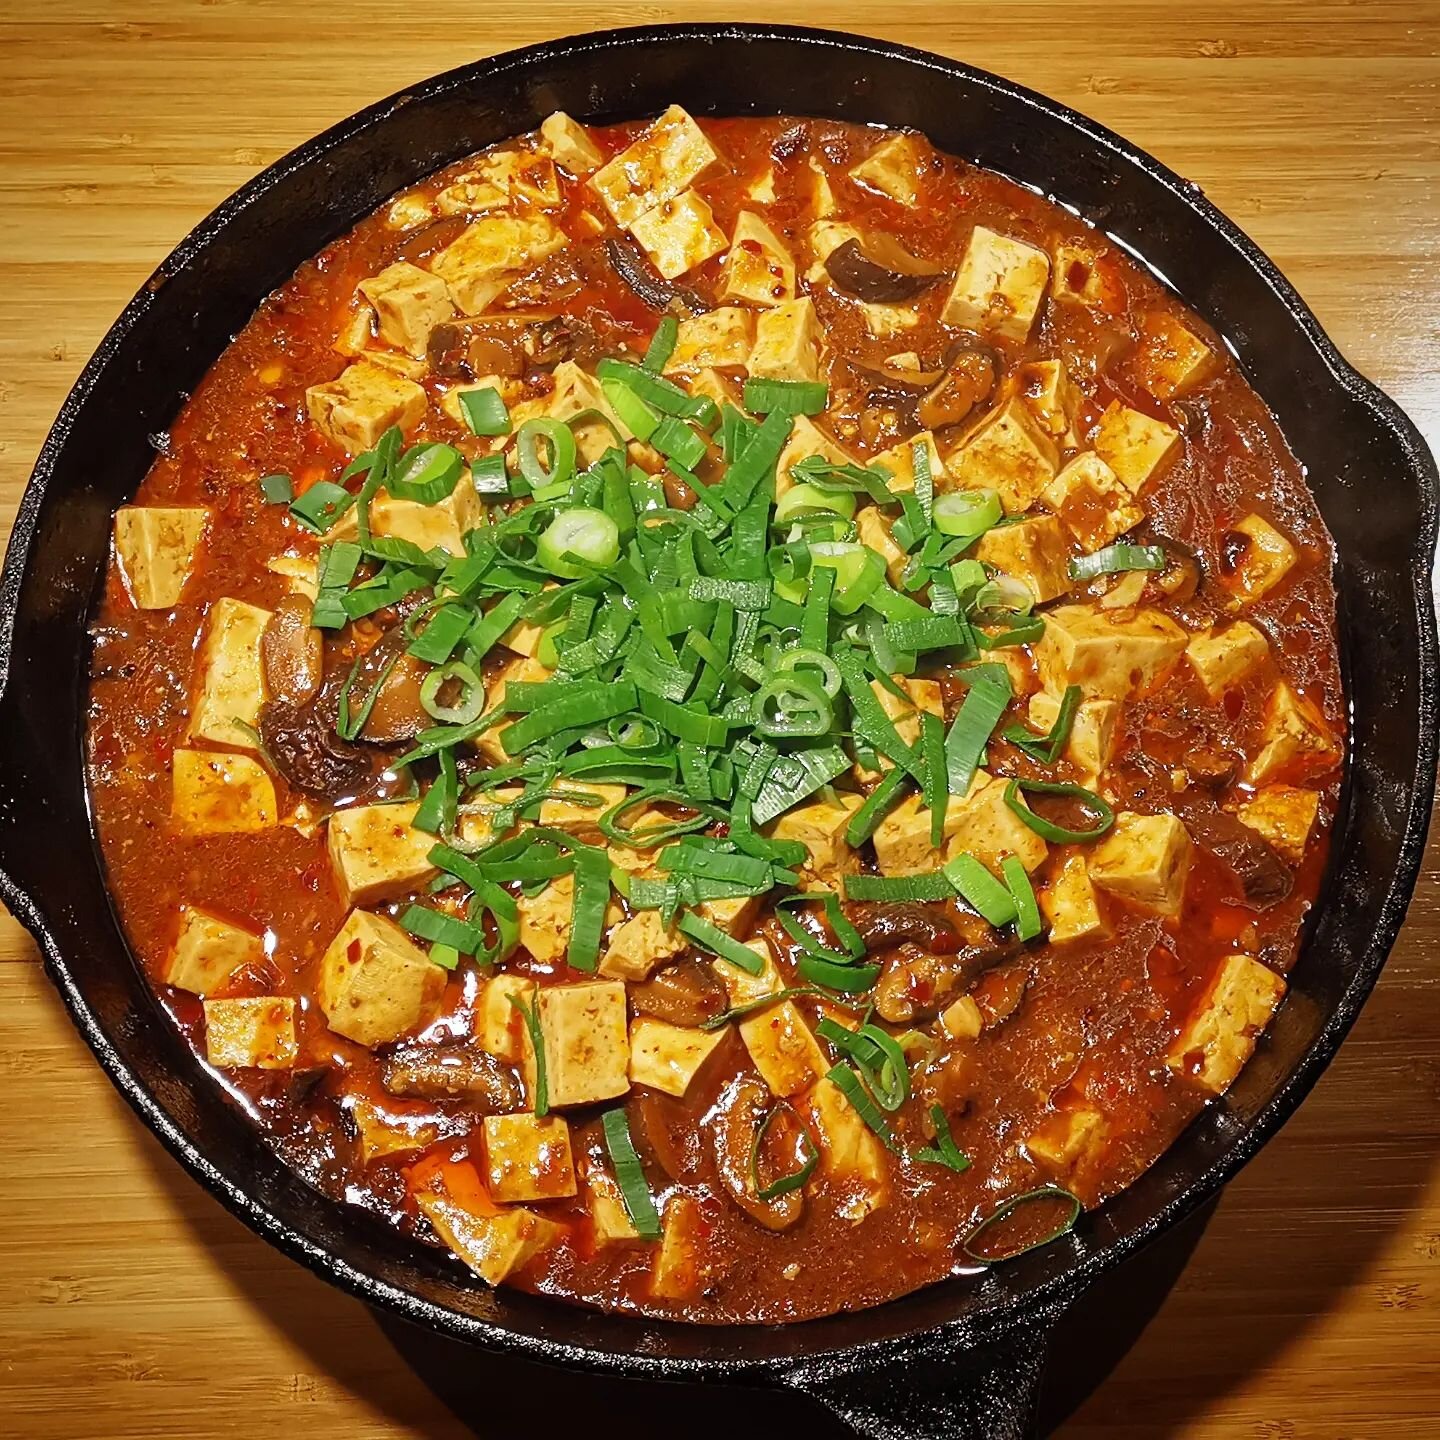 Sometimes we travel to the culinary delights of Sichuan province China. This is a vegan version of Ma Po Tofu 🥘

It isn't as spicy as it looks but it is more delicious than it appears! A creamy bean sauce with numbing peppers, it is a plethora of um